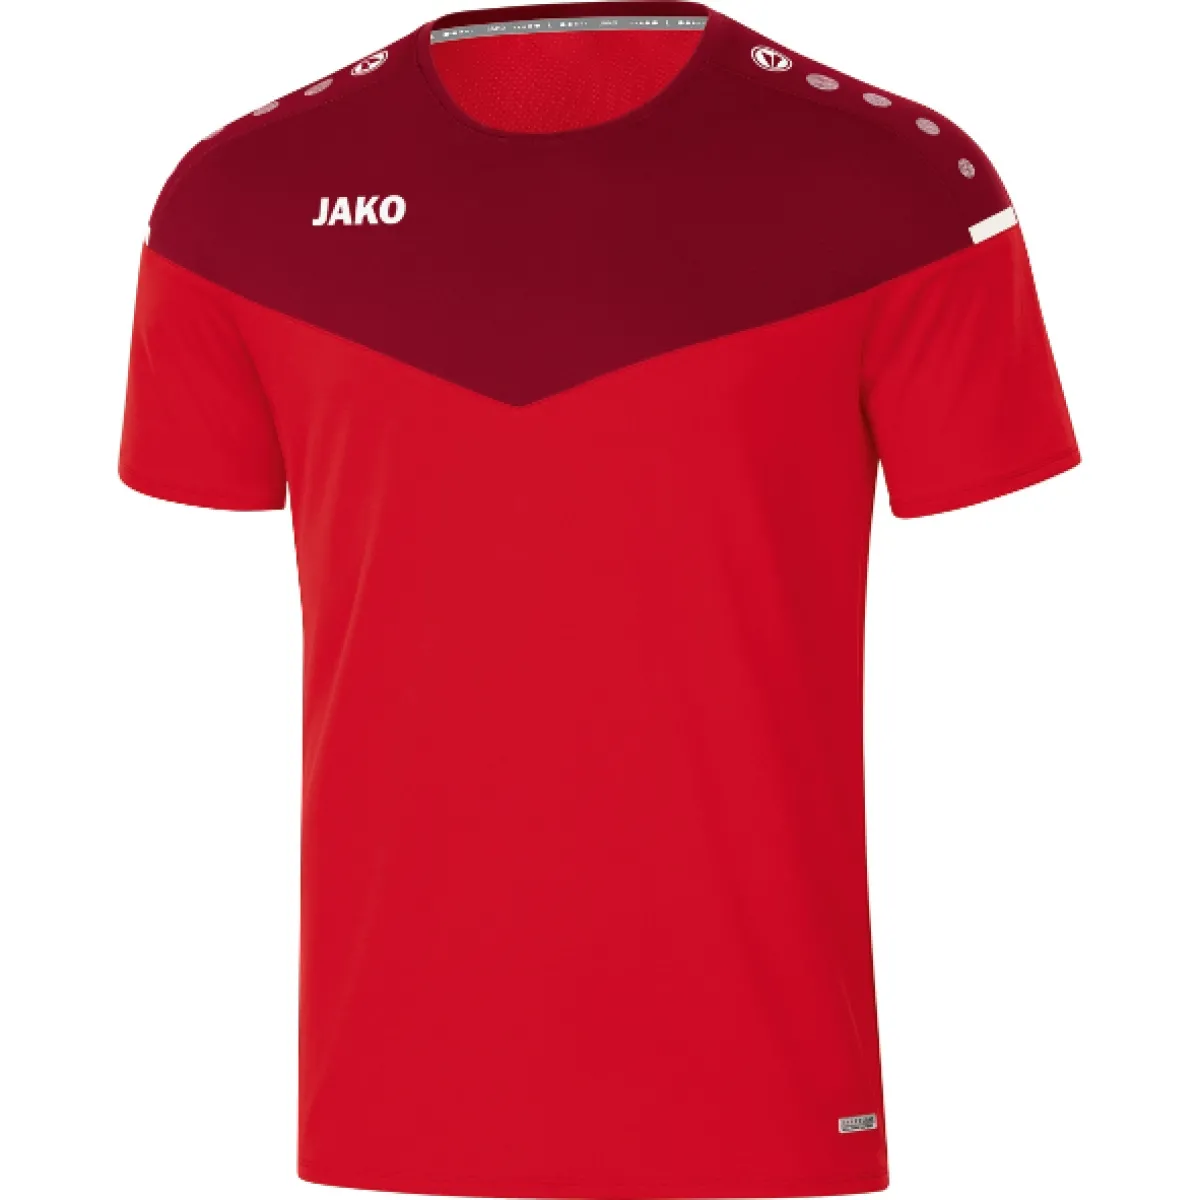 Jako T-Shirt Champ red/wine red front